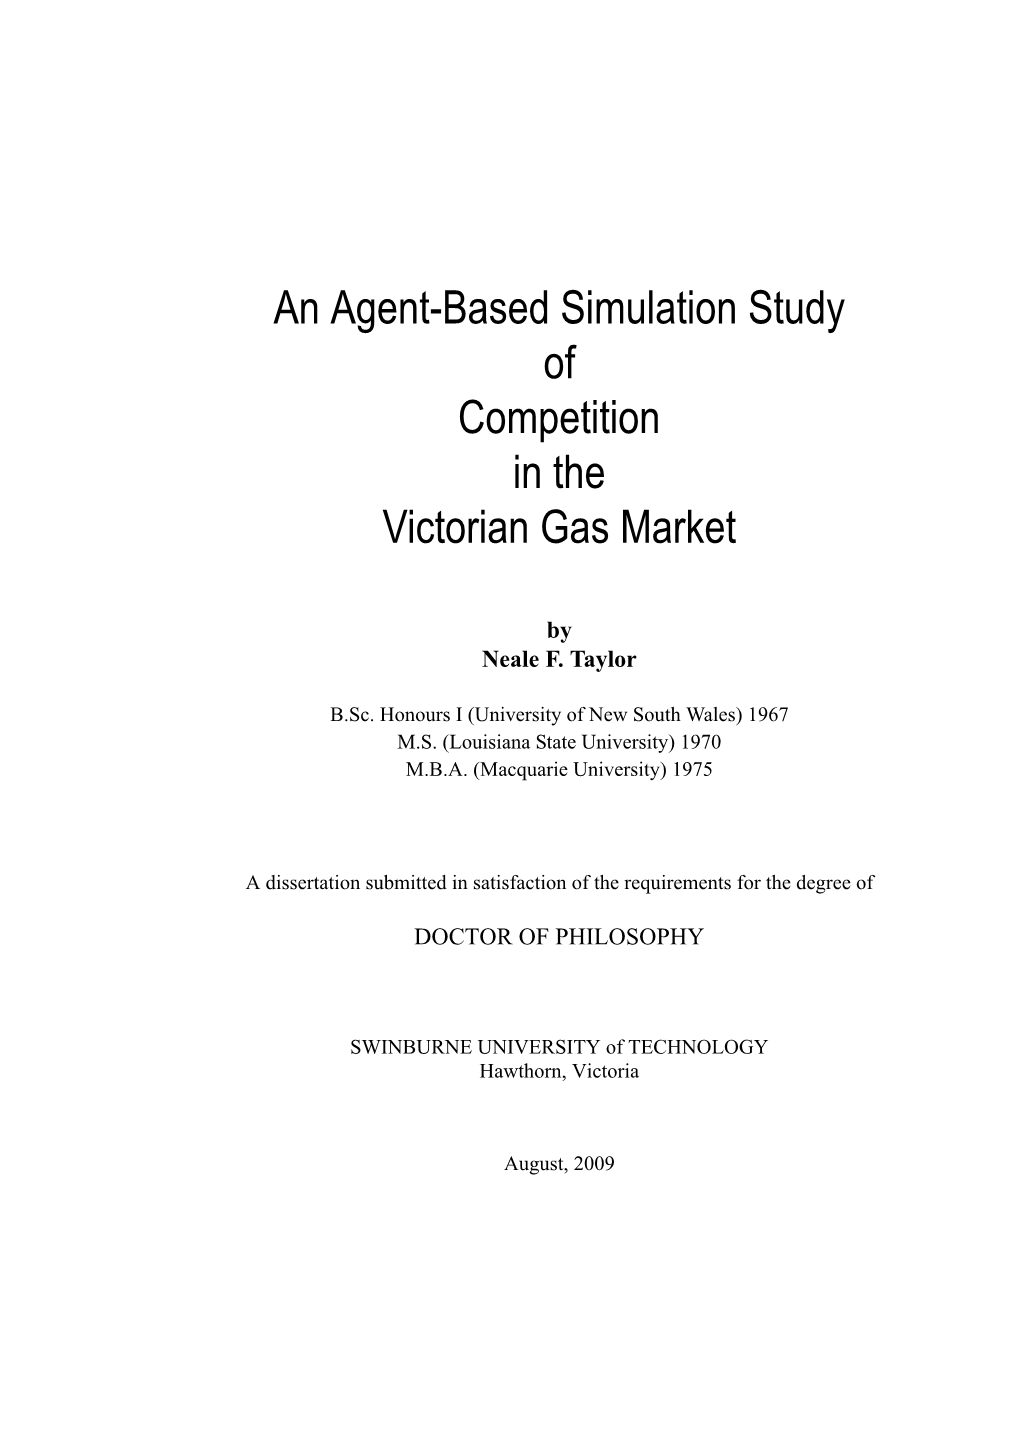 An Agent-Based Simulation Study of Competition in the Victorian Gas Market